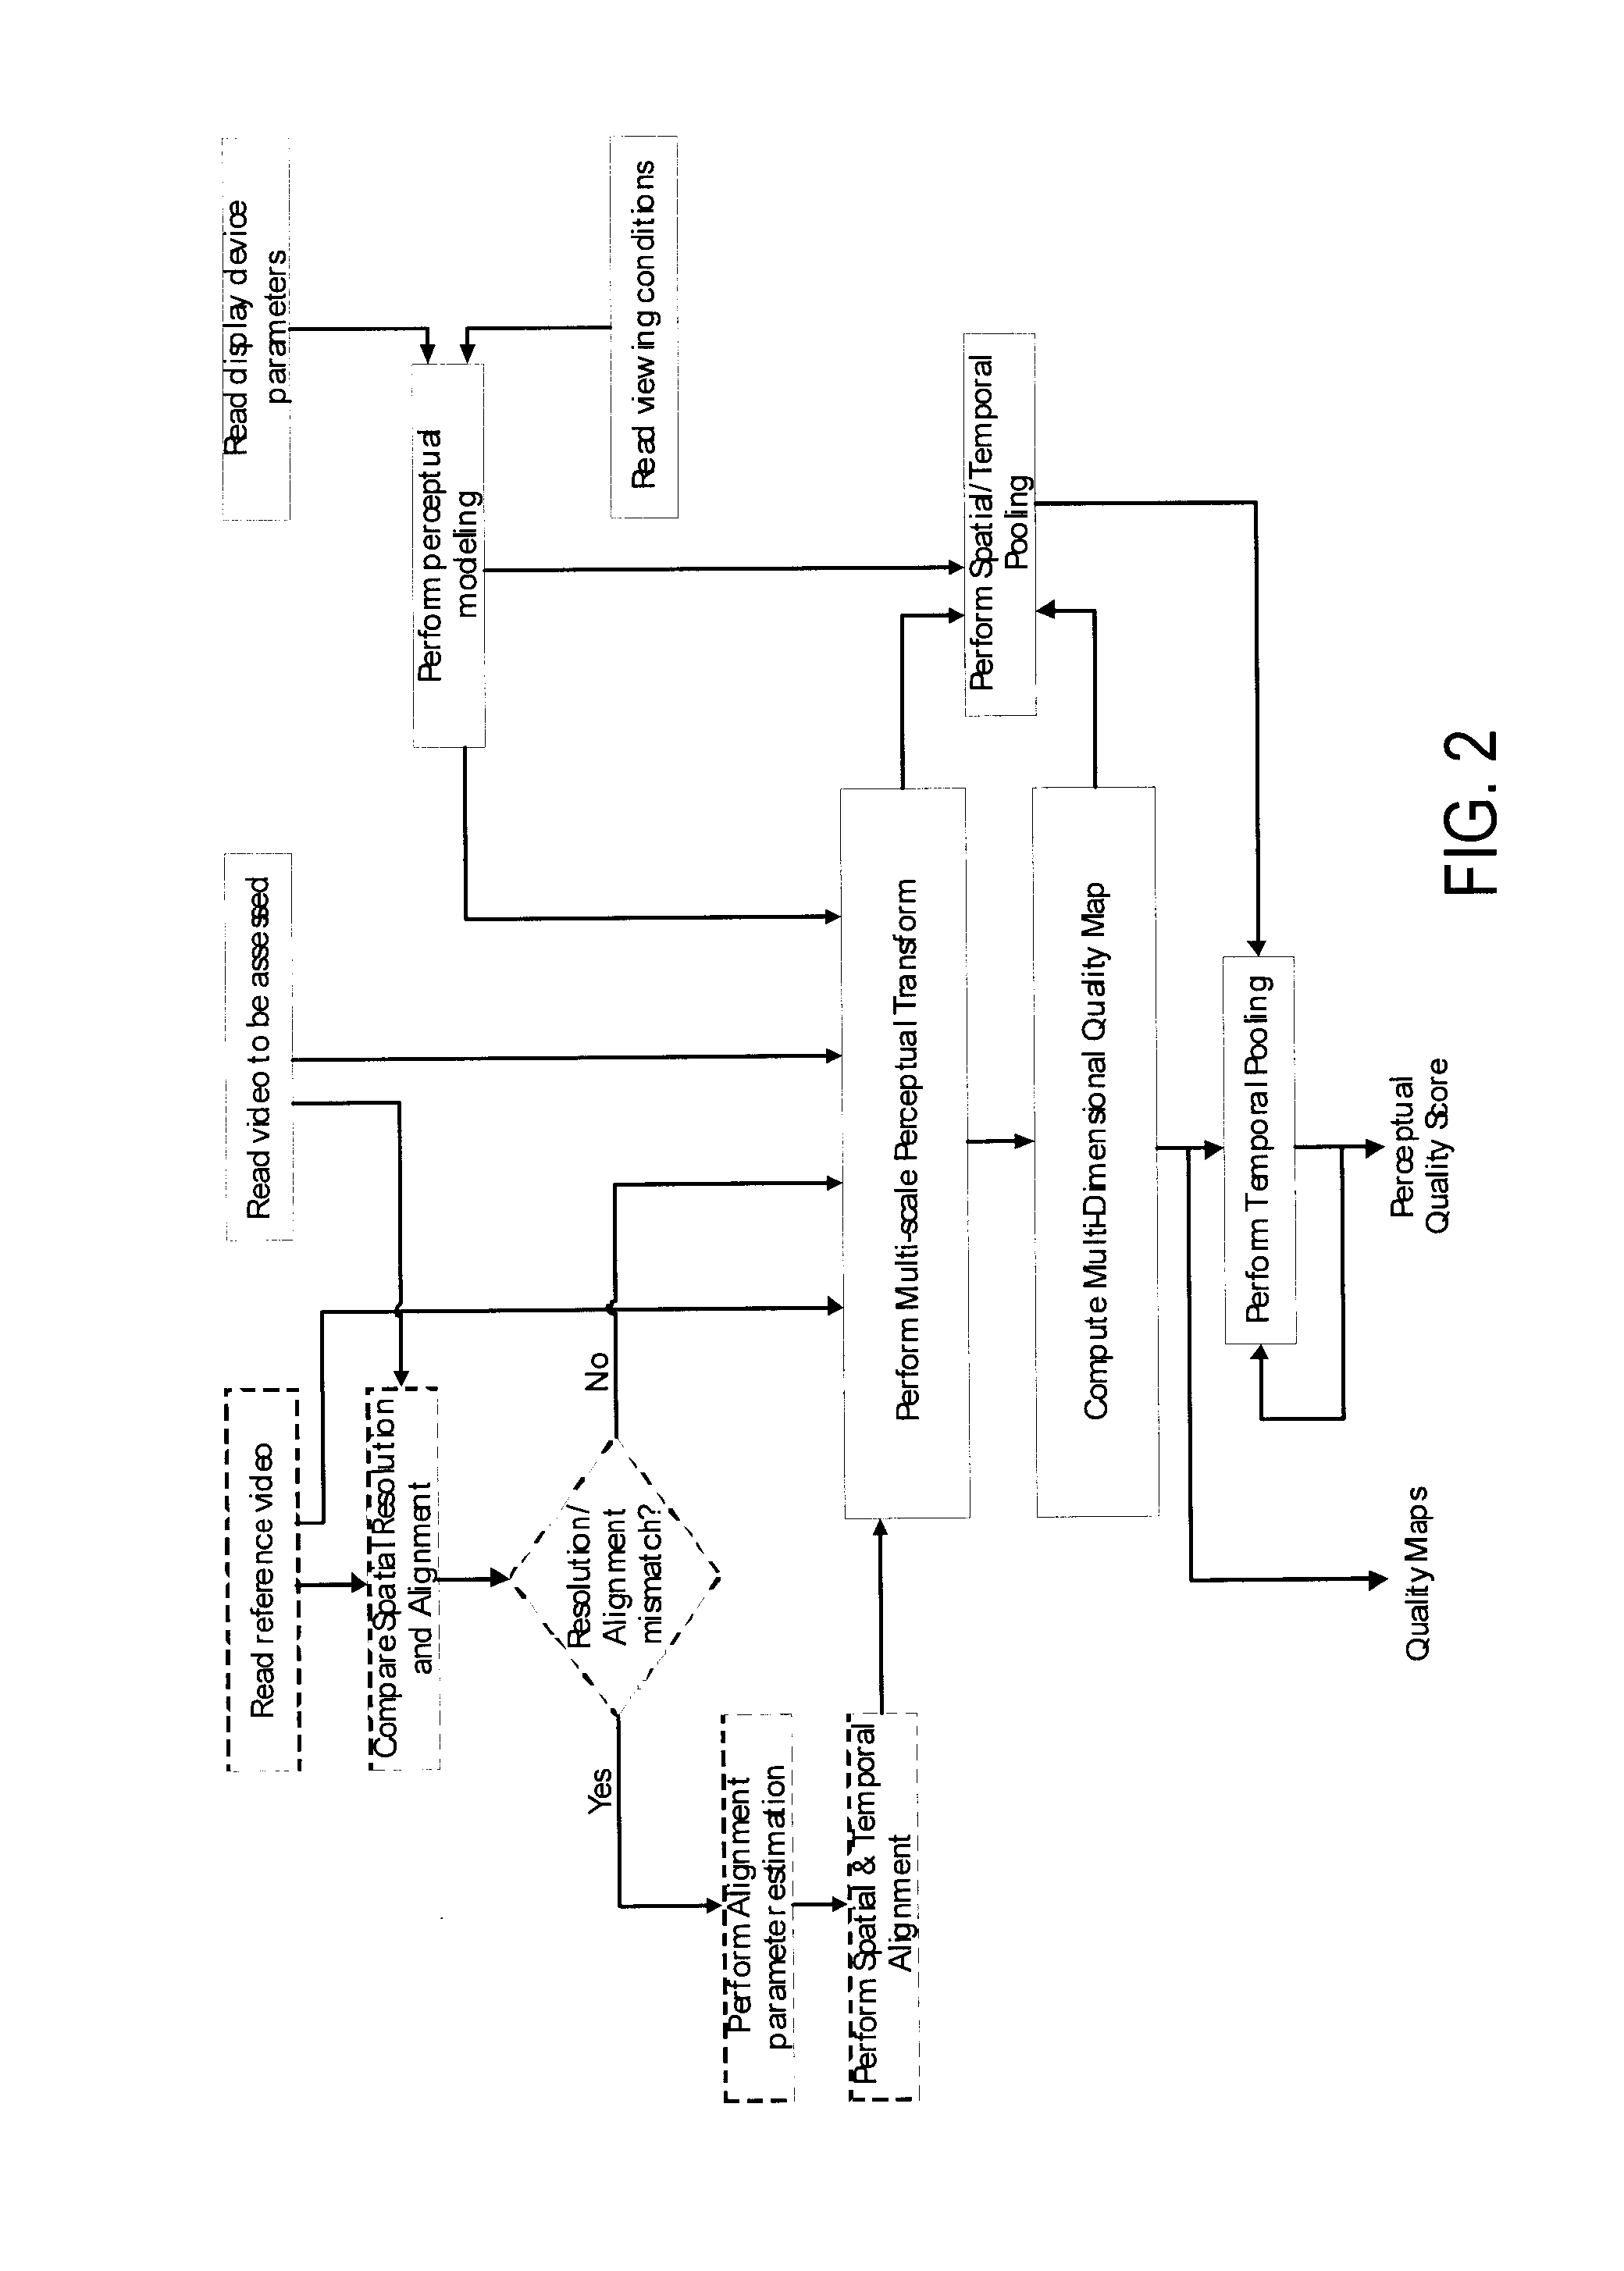 Method and system for objective perceptual video quality assessment